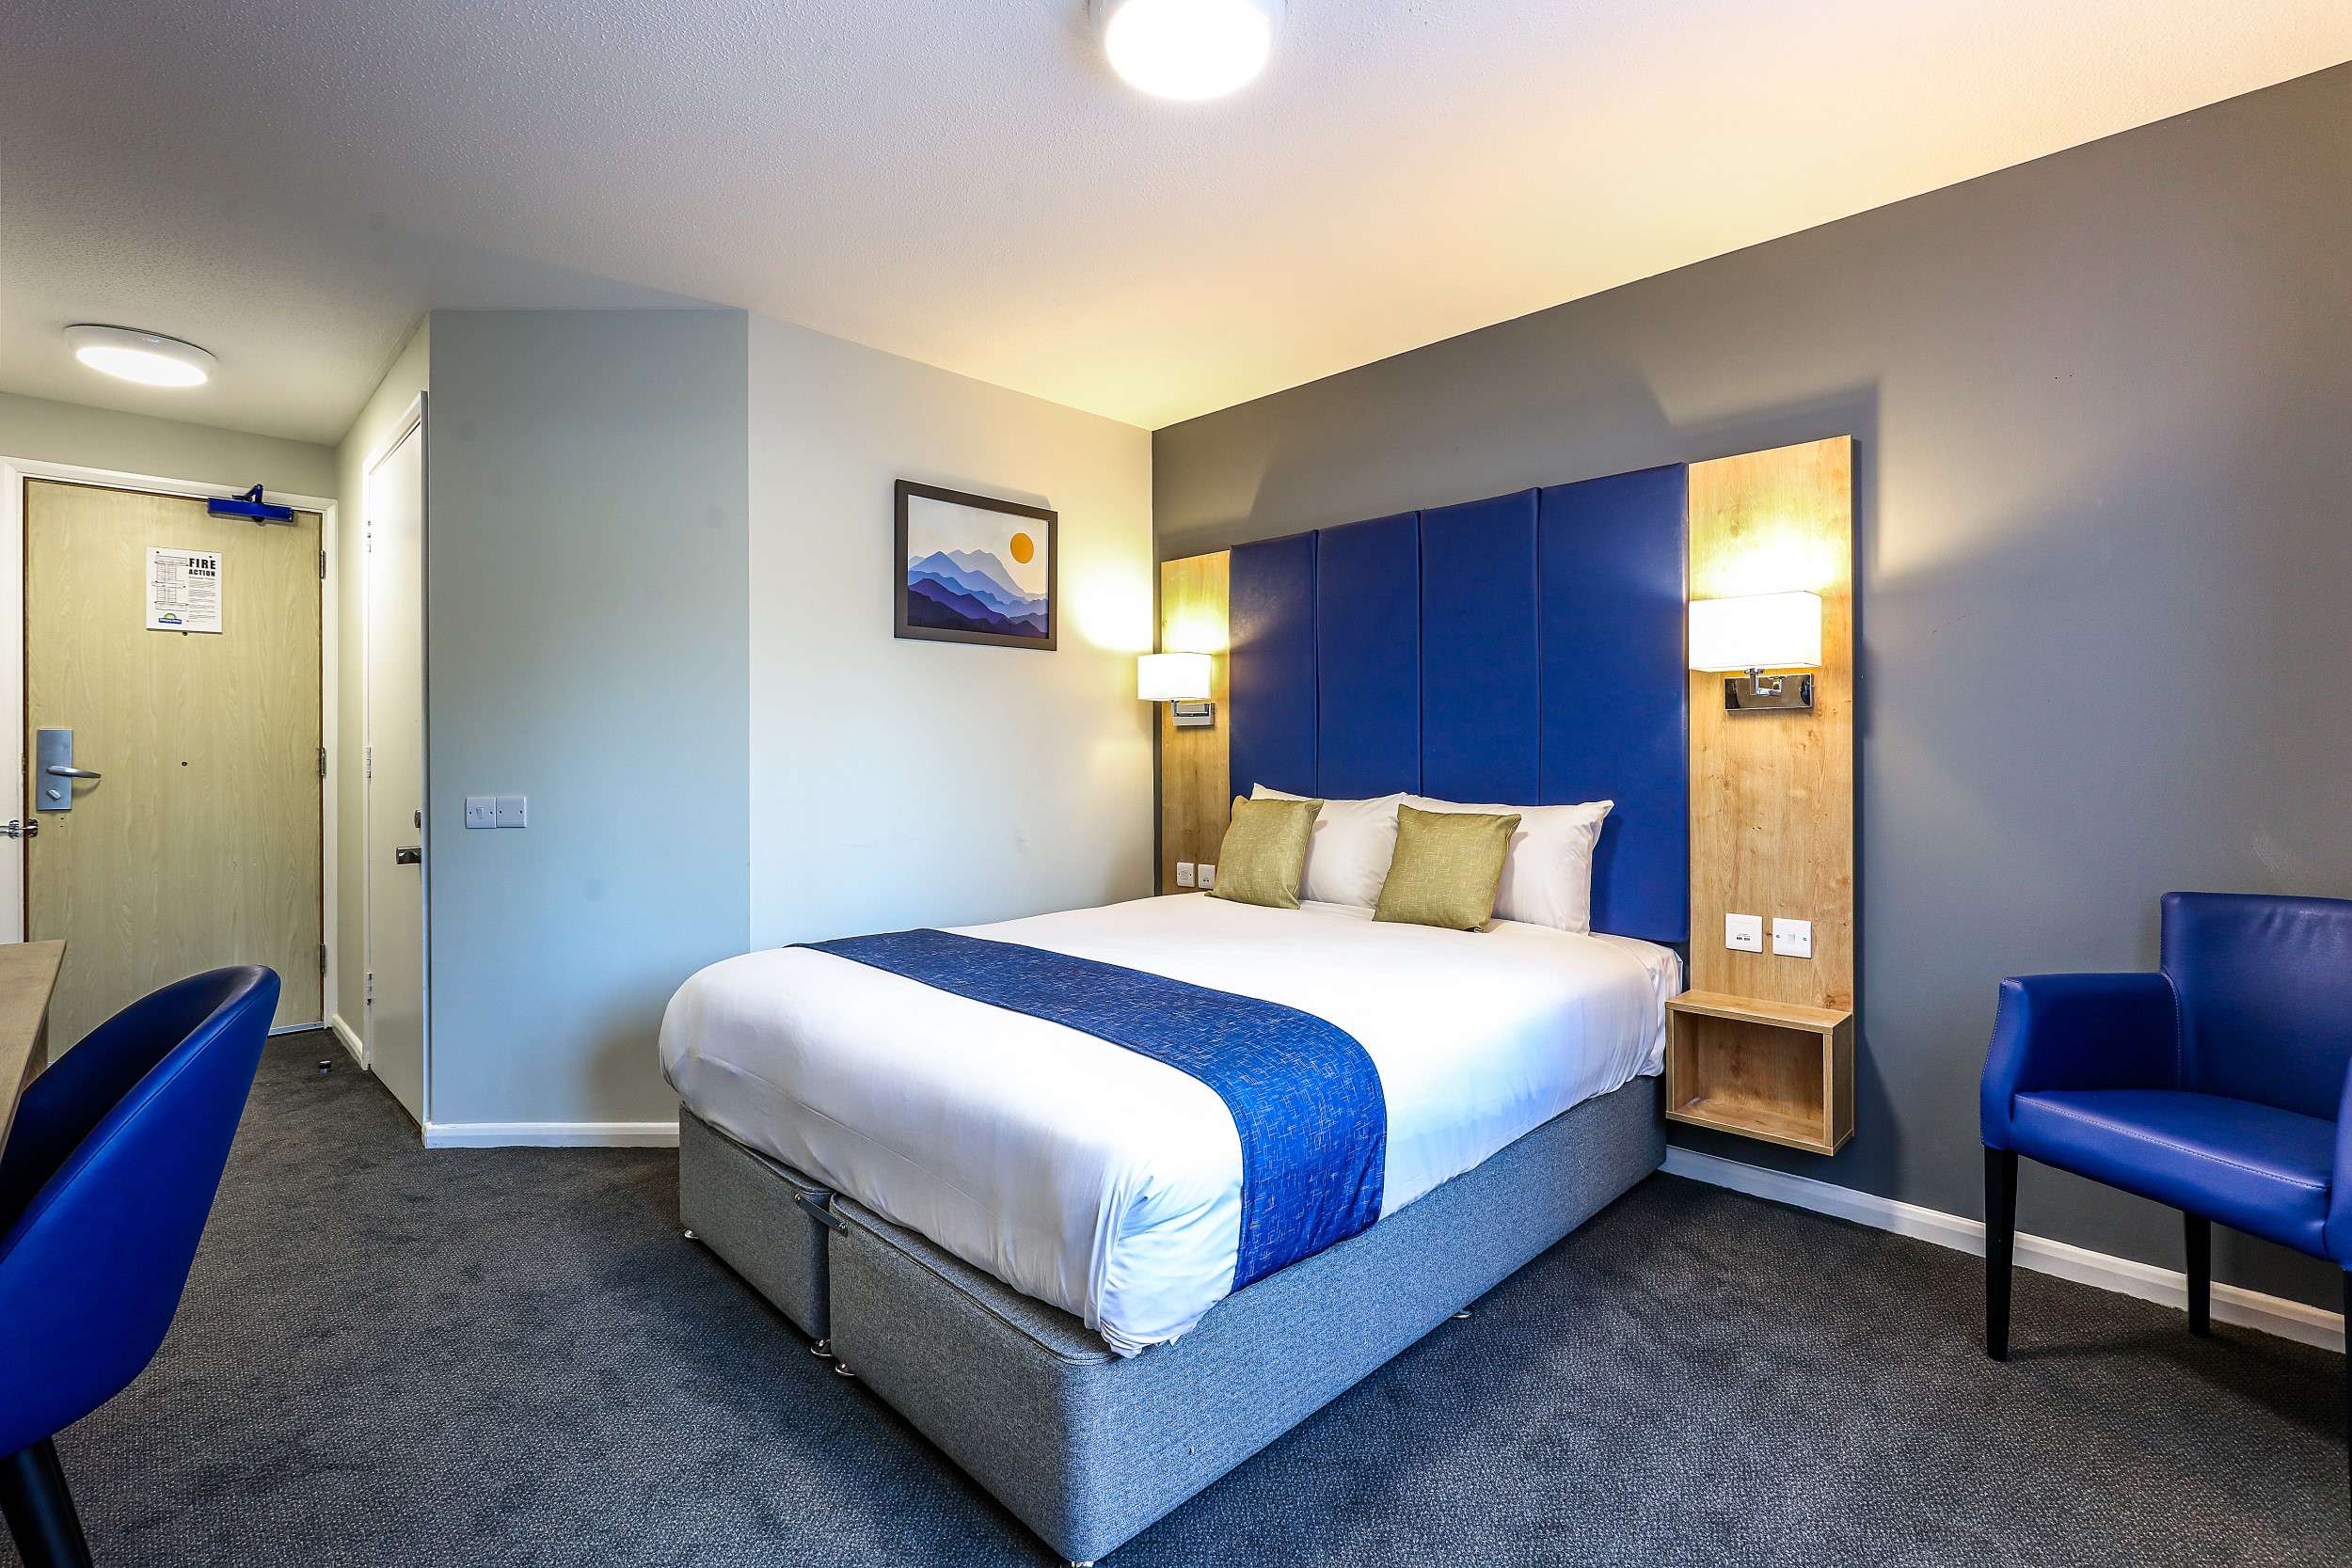 Images Days Inn London Stansted M11